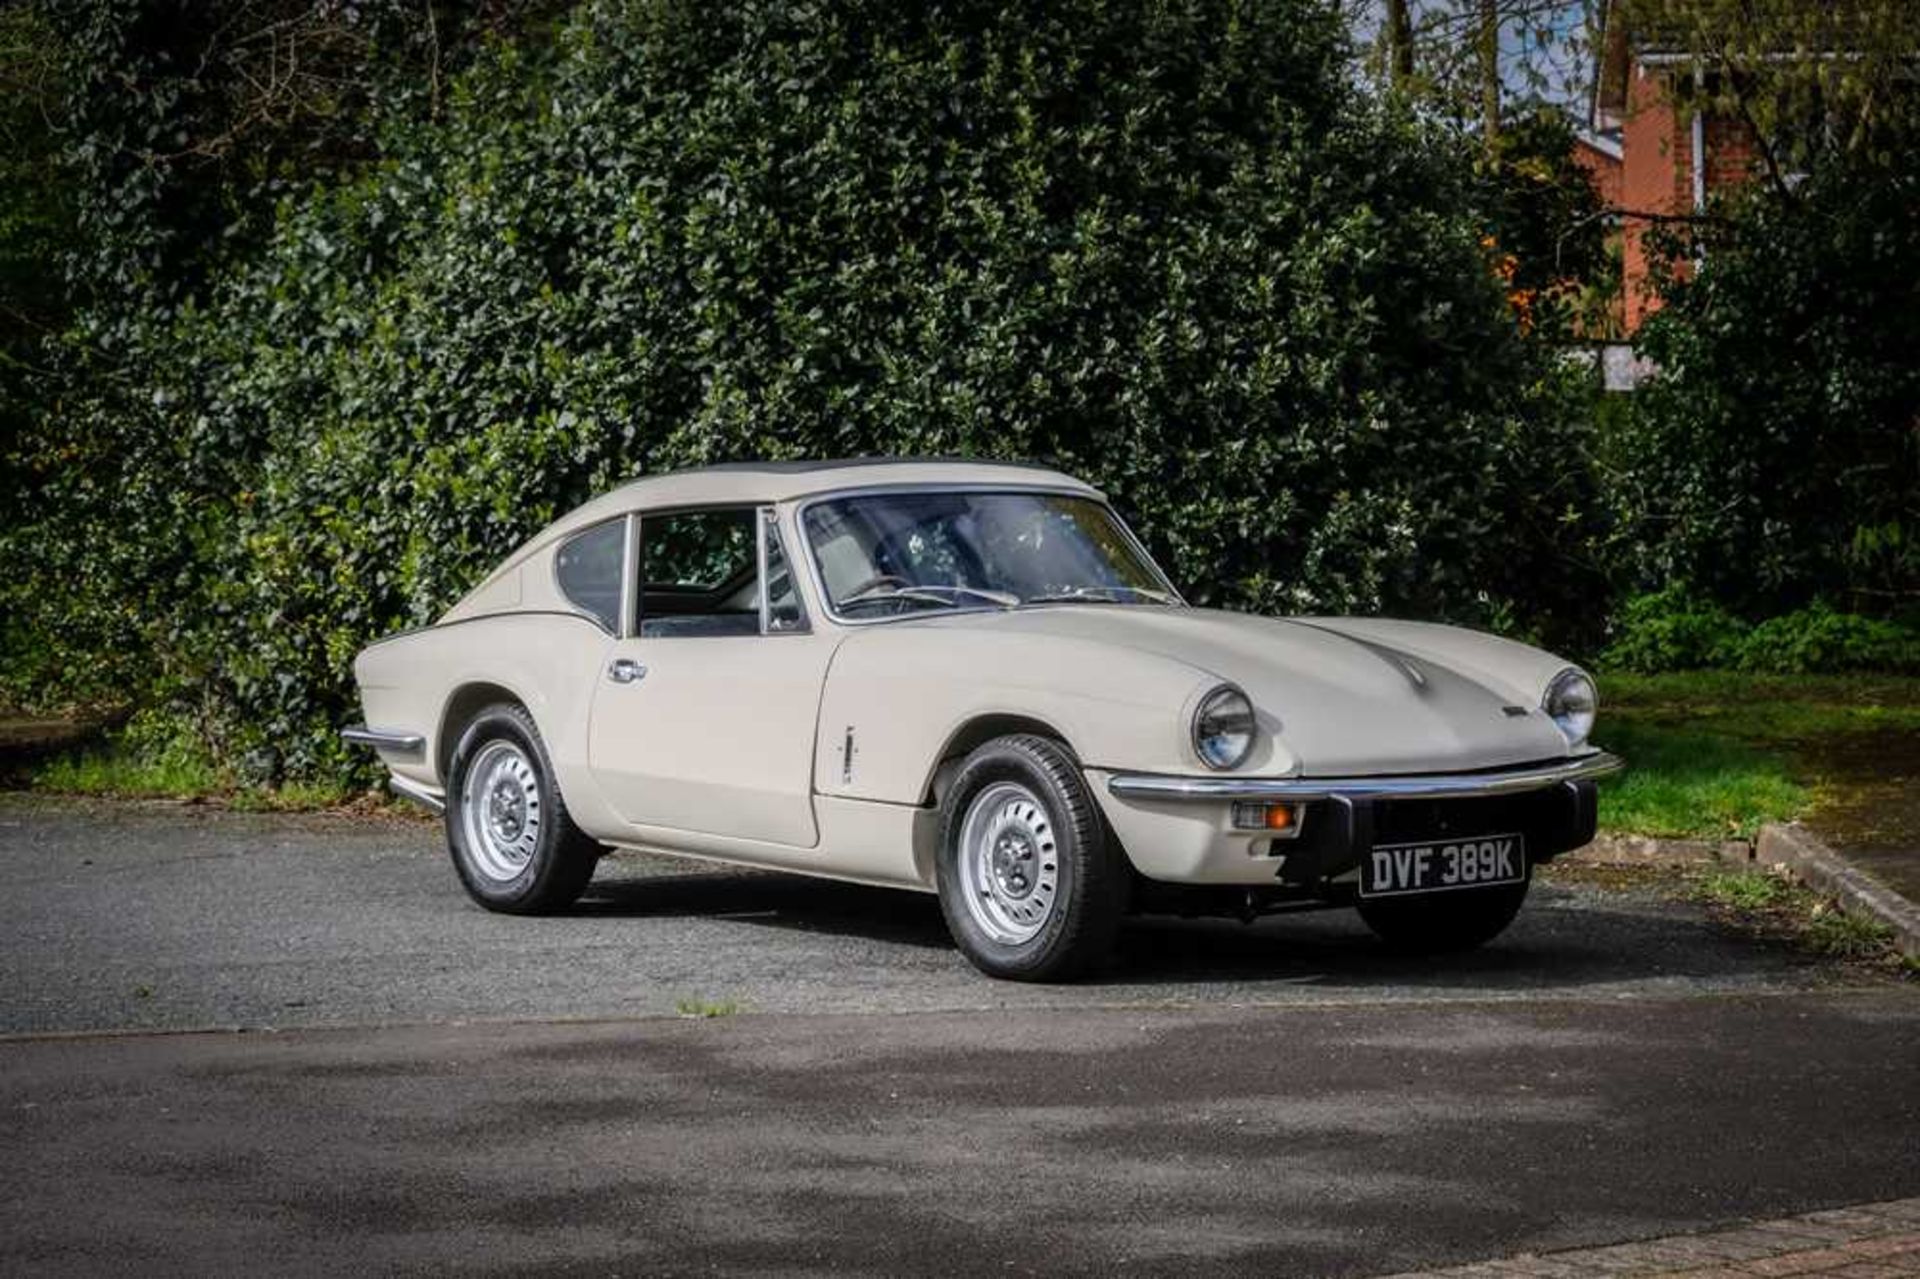 1971 Triumph GT6 MkIII Fresh from a full professional restoration - Image 3 of 106